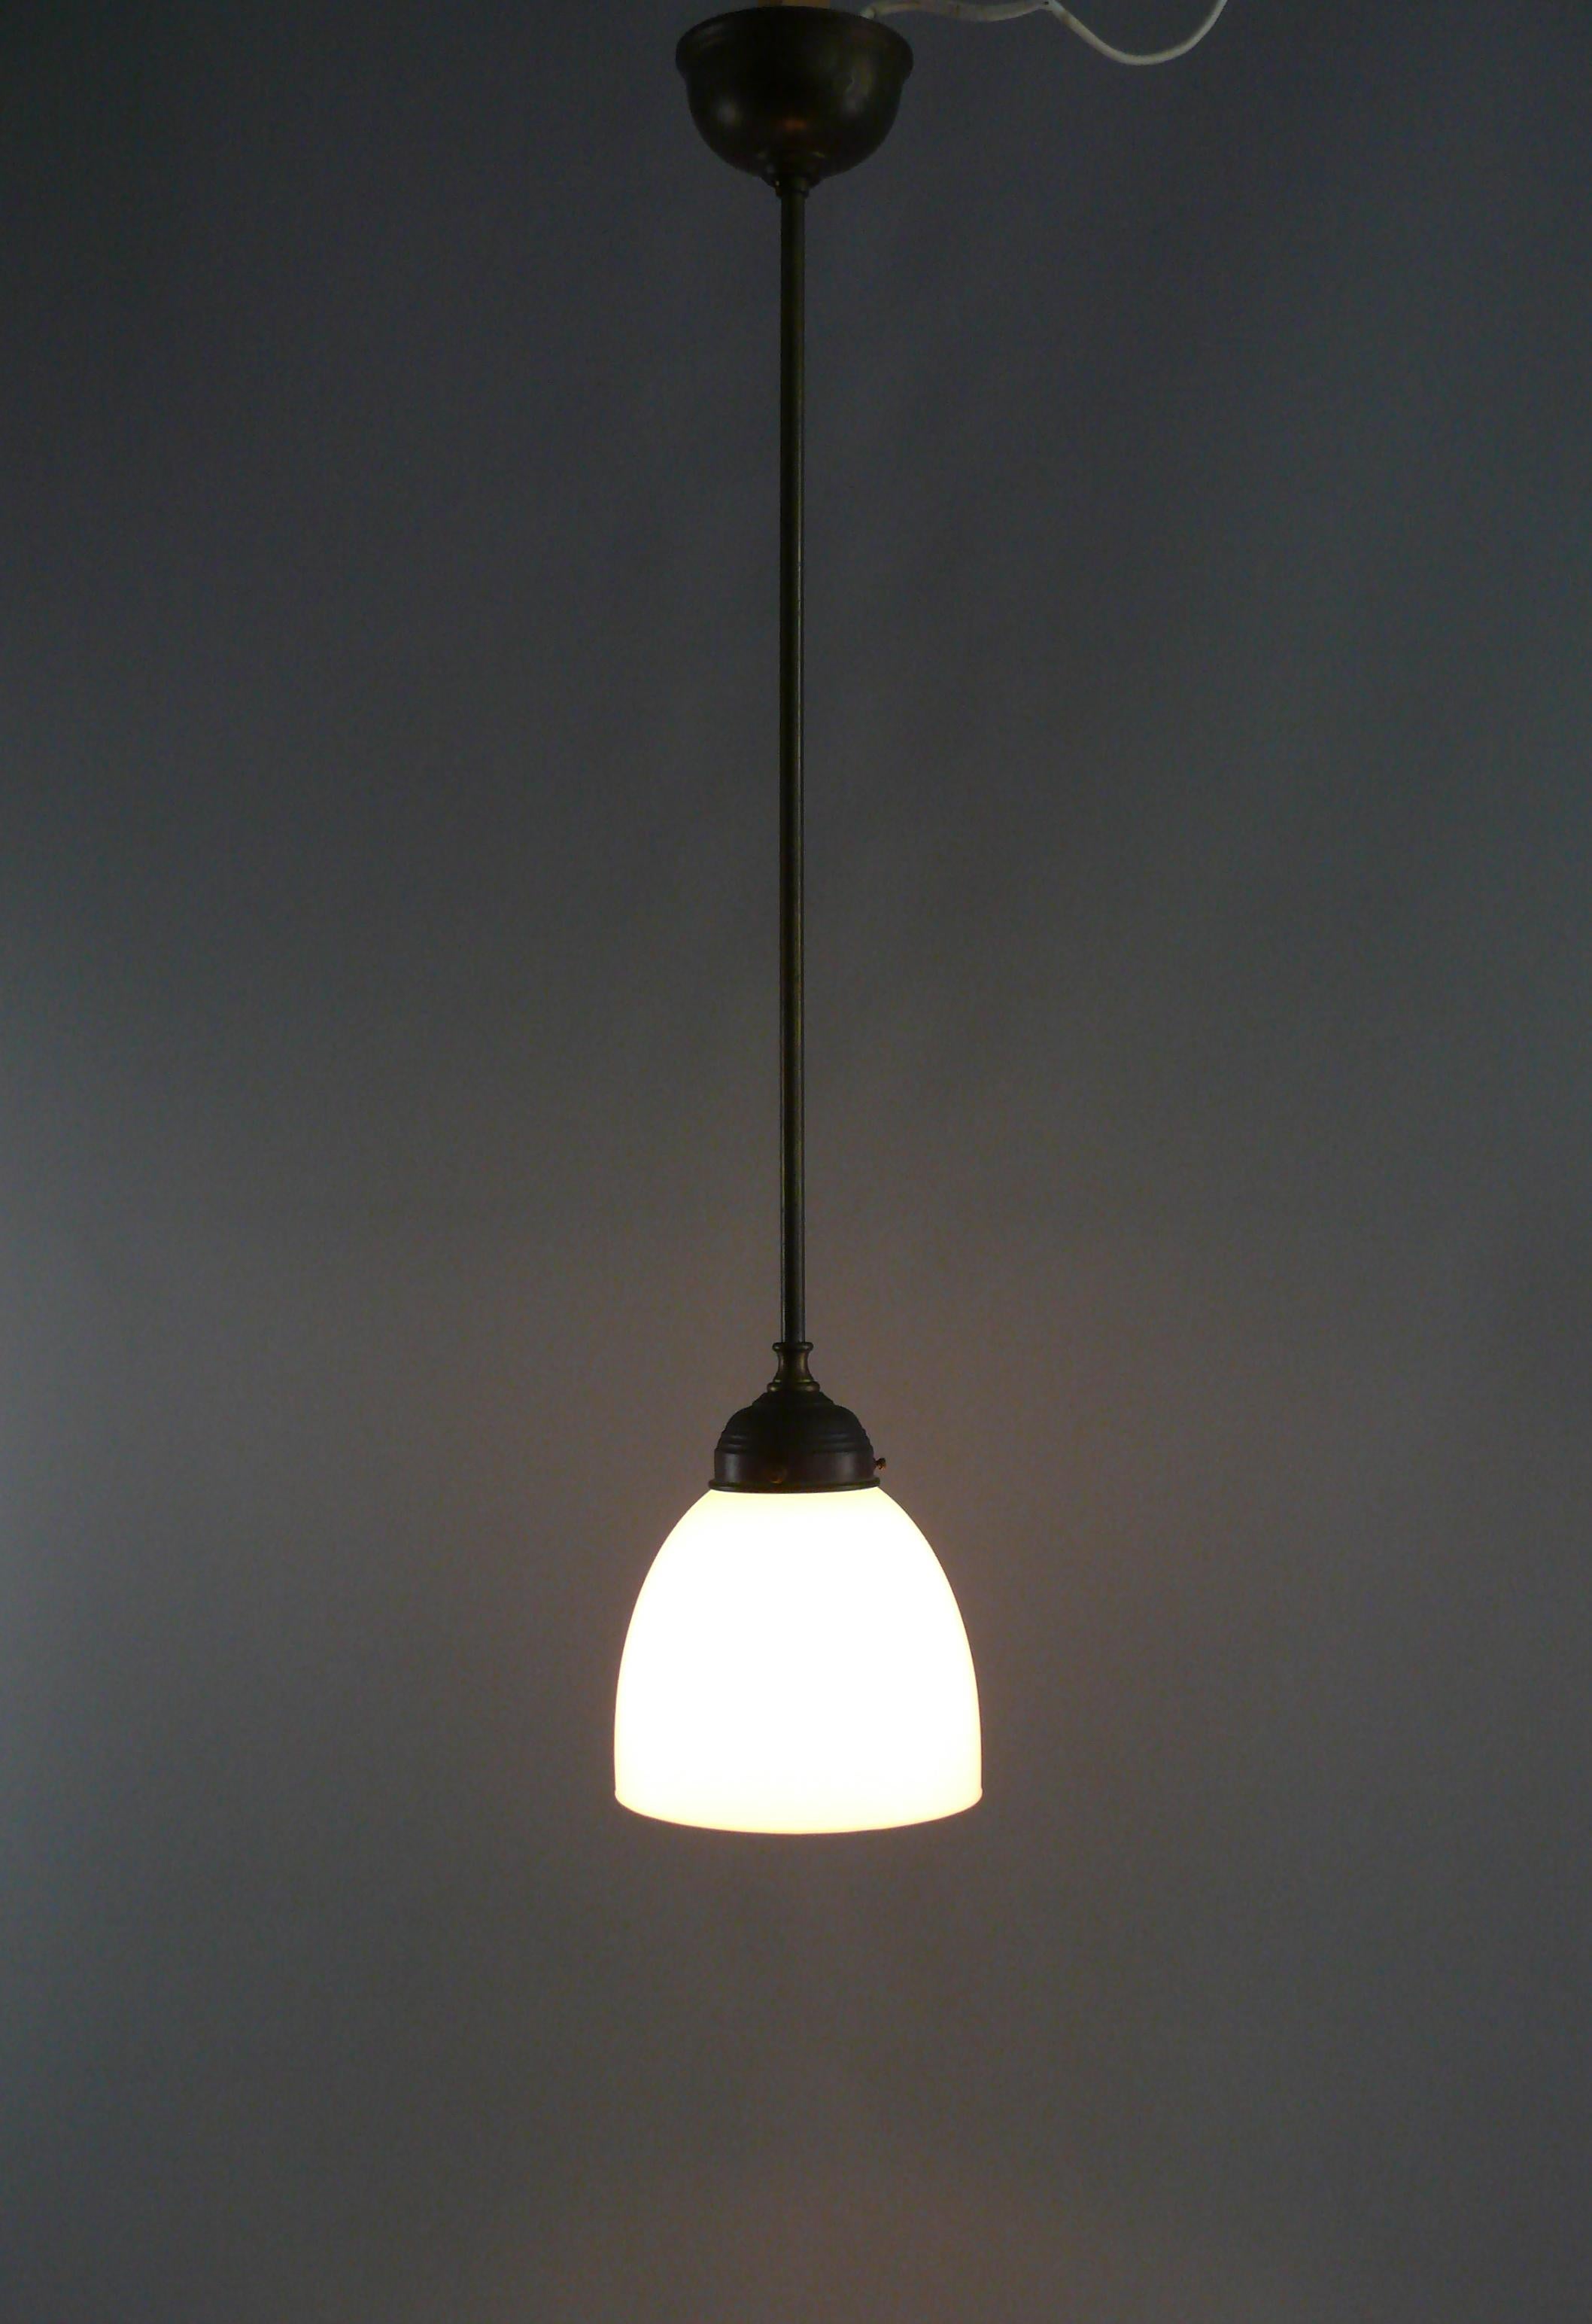 1 pair of high-quality rod pendant lights from the company 